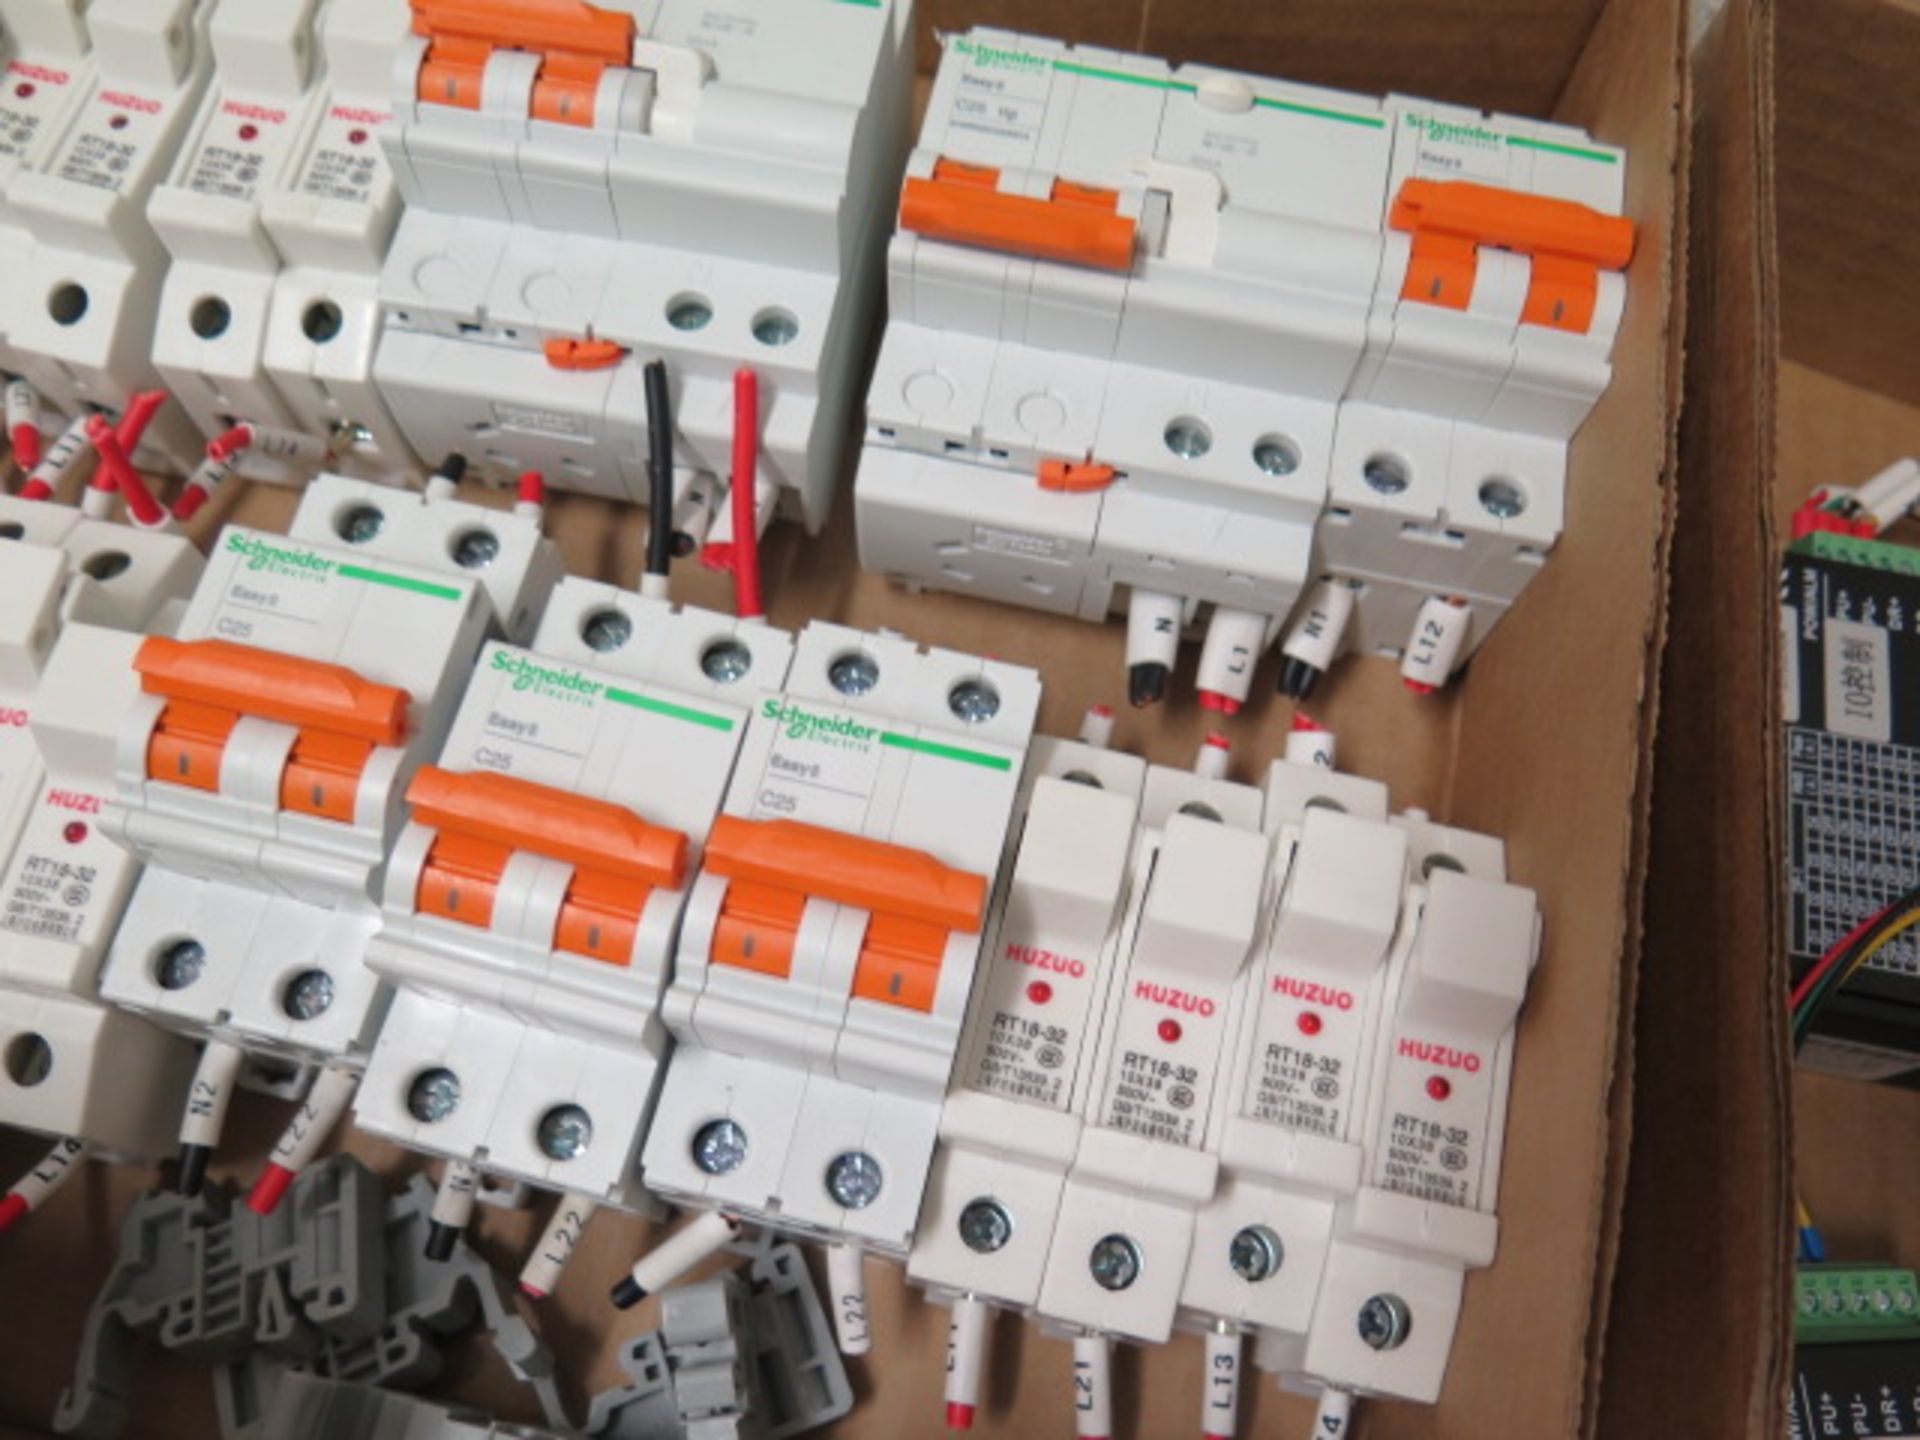 Schneider Easy8 C25 EA9AN2C25 Circuit Breakers (12) and Huzuo RT18-32 10X38 500V G3/T13539.2 Fuse Bl - Image 5 of 7